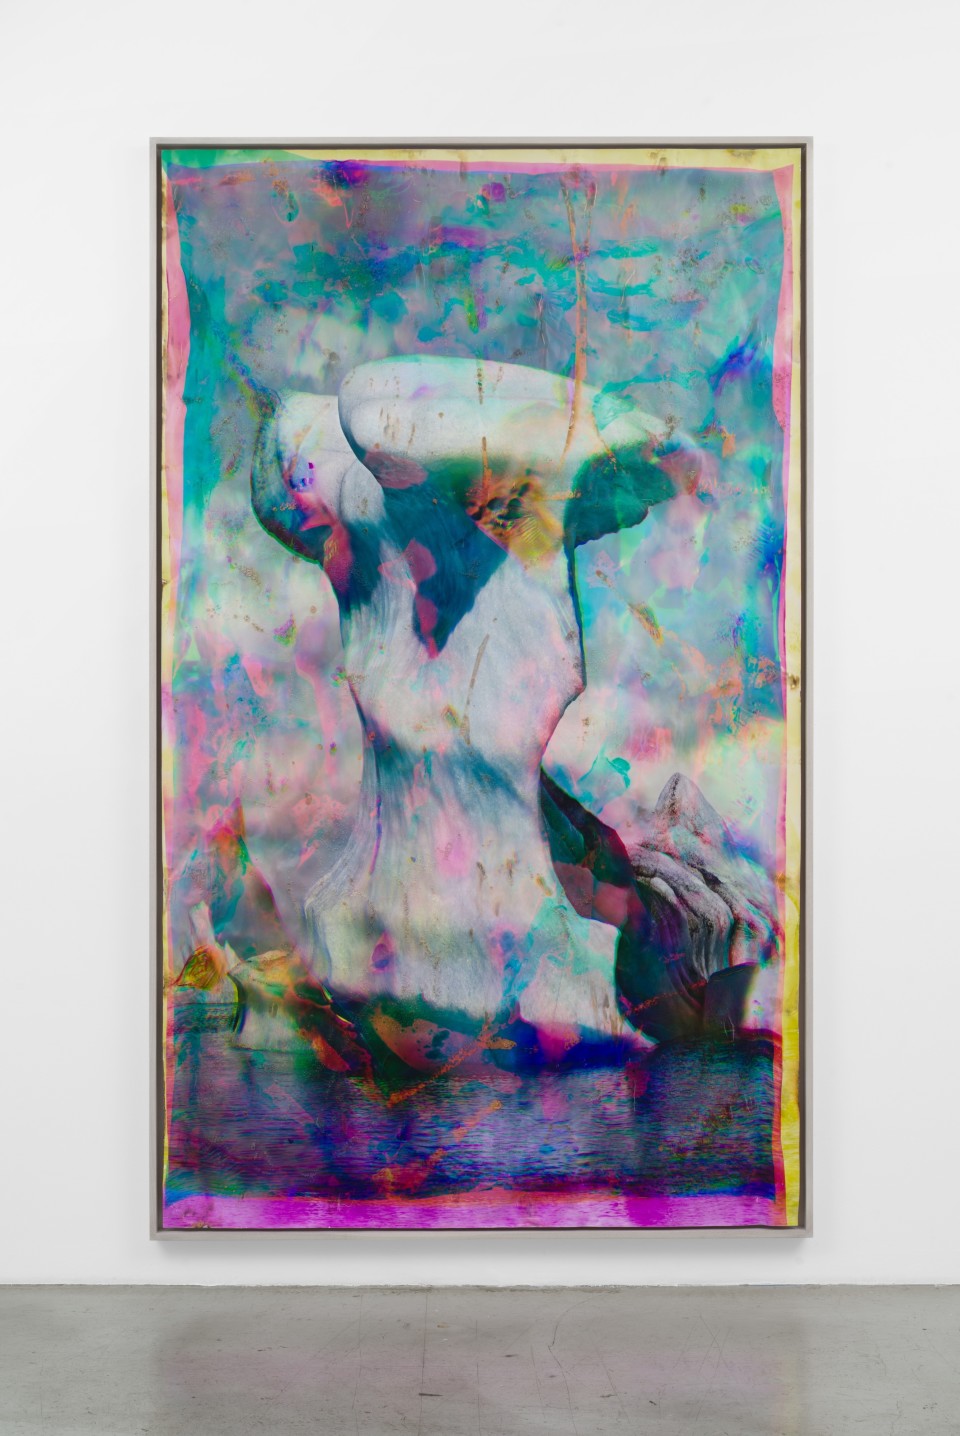 Image: Matthew Brandt  Vatnajökull CMY1, 2018-2020  signed, titled and dated verso  heated chromogenic print, with acrylic varnish and Aqua-Resin support  120 x 72 inches (304.8 x 182.9 cm)